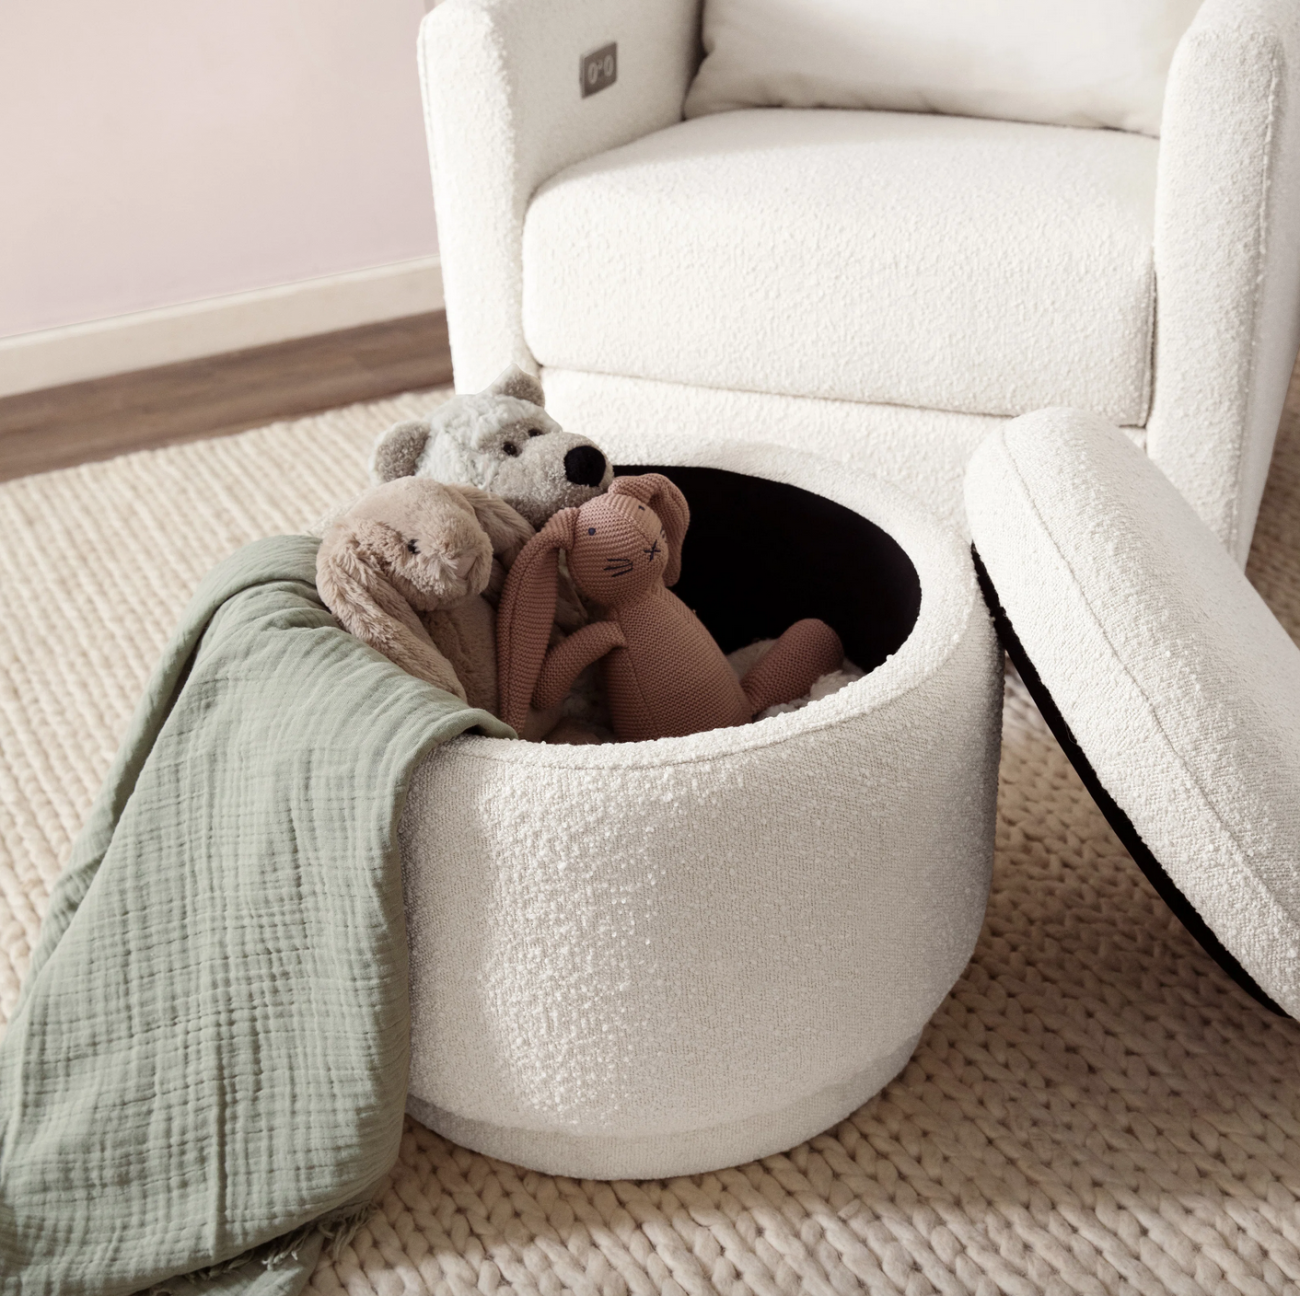 Armchair and pouf with storage space for stuffed animals and towel